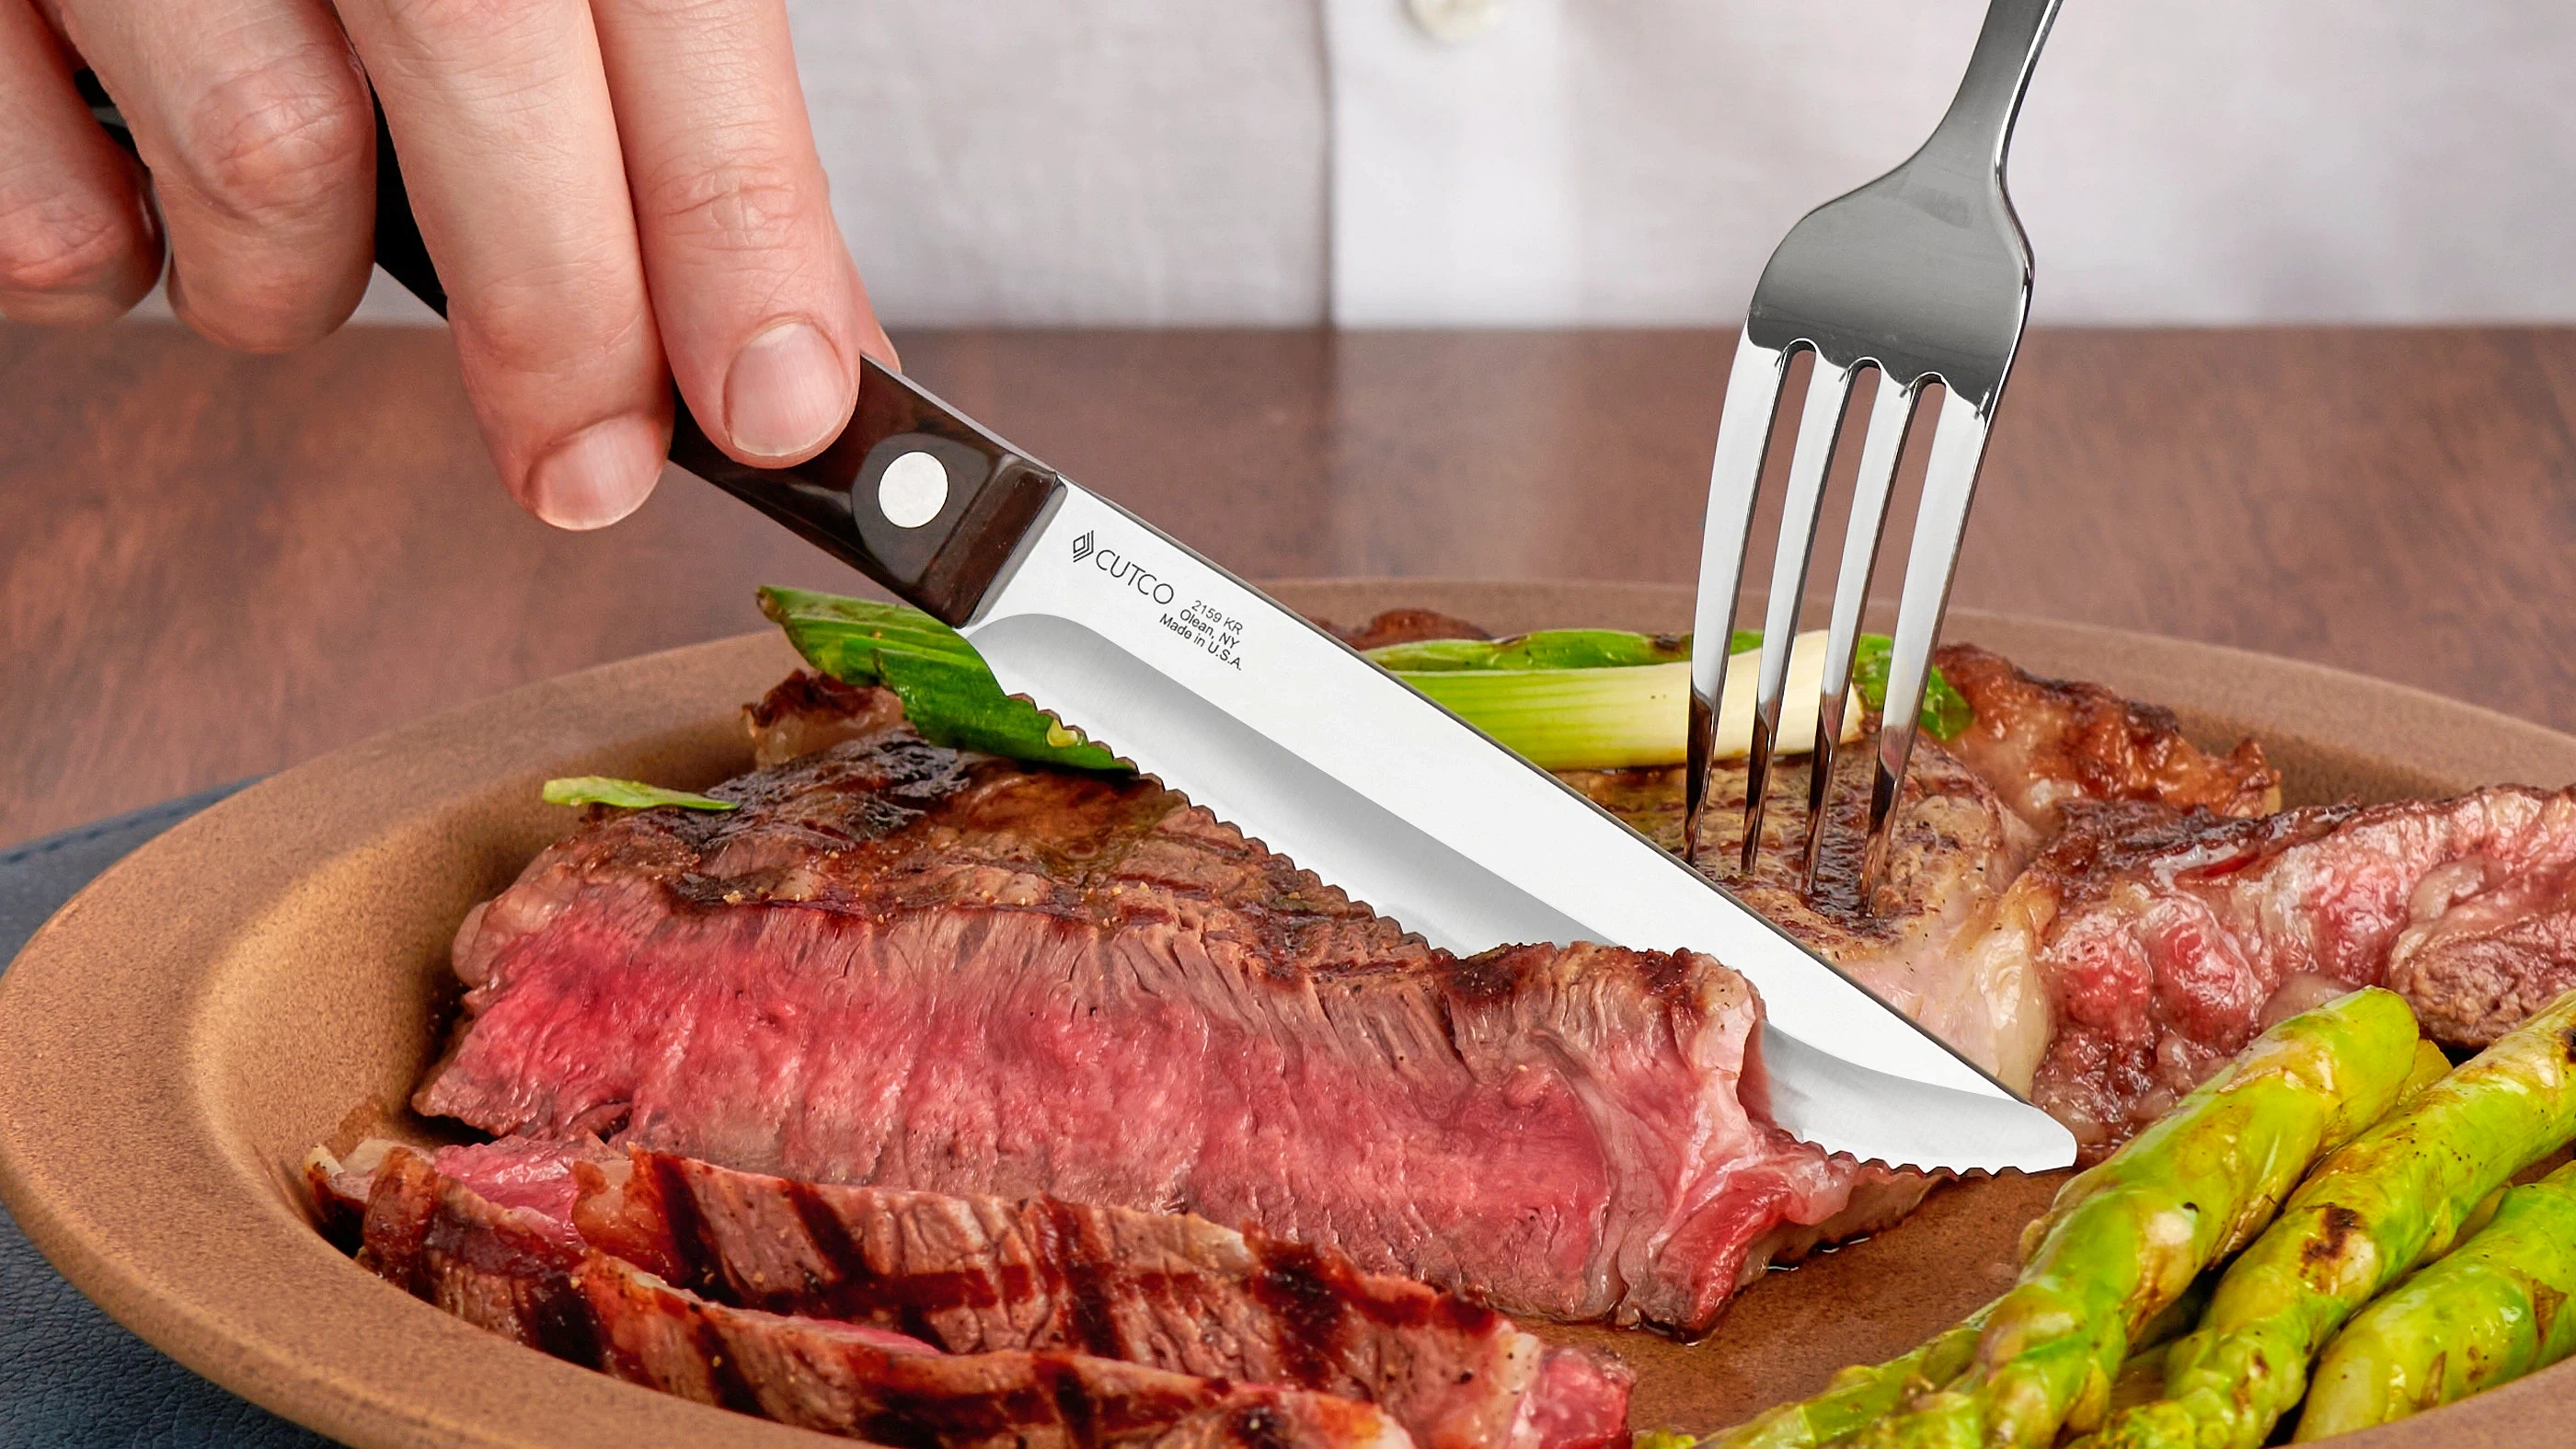 Cutco Cutlery - The Table Knife vs. the Steak Knife. 🔪 Which one are you  choosing? Comment below! ⤵️